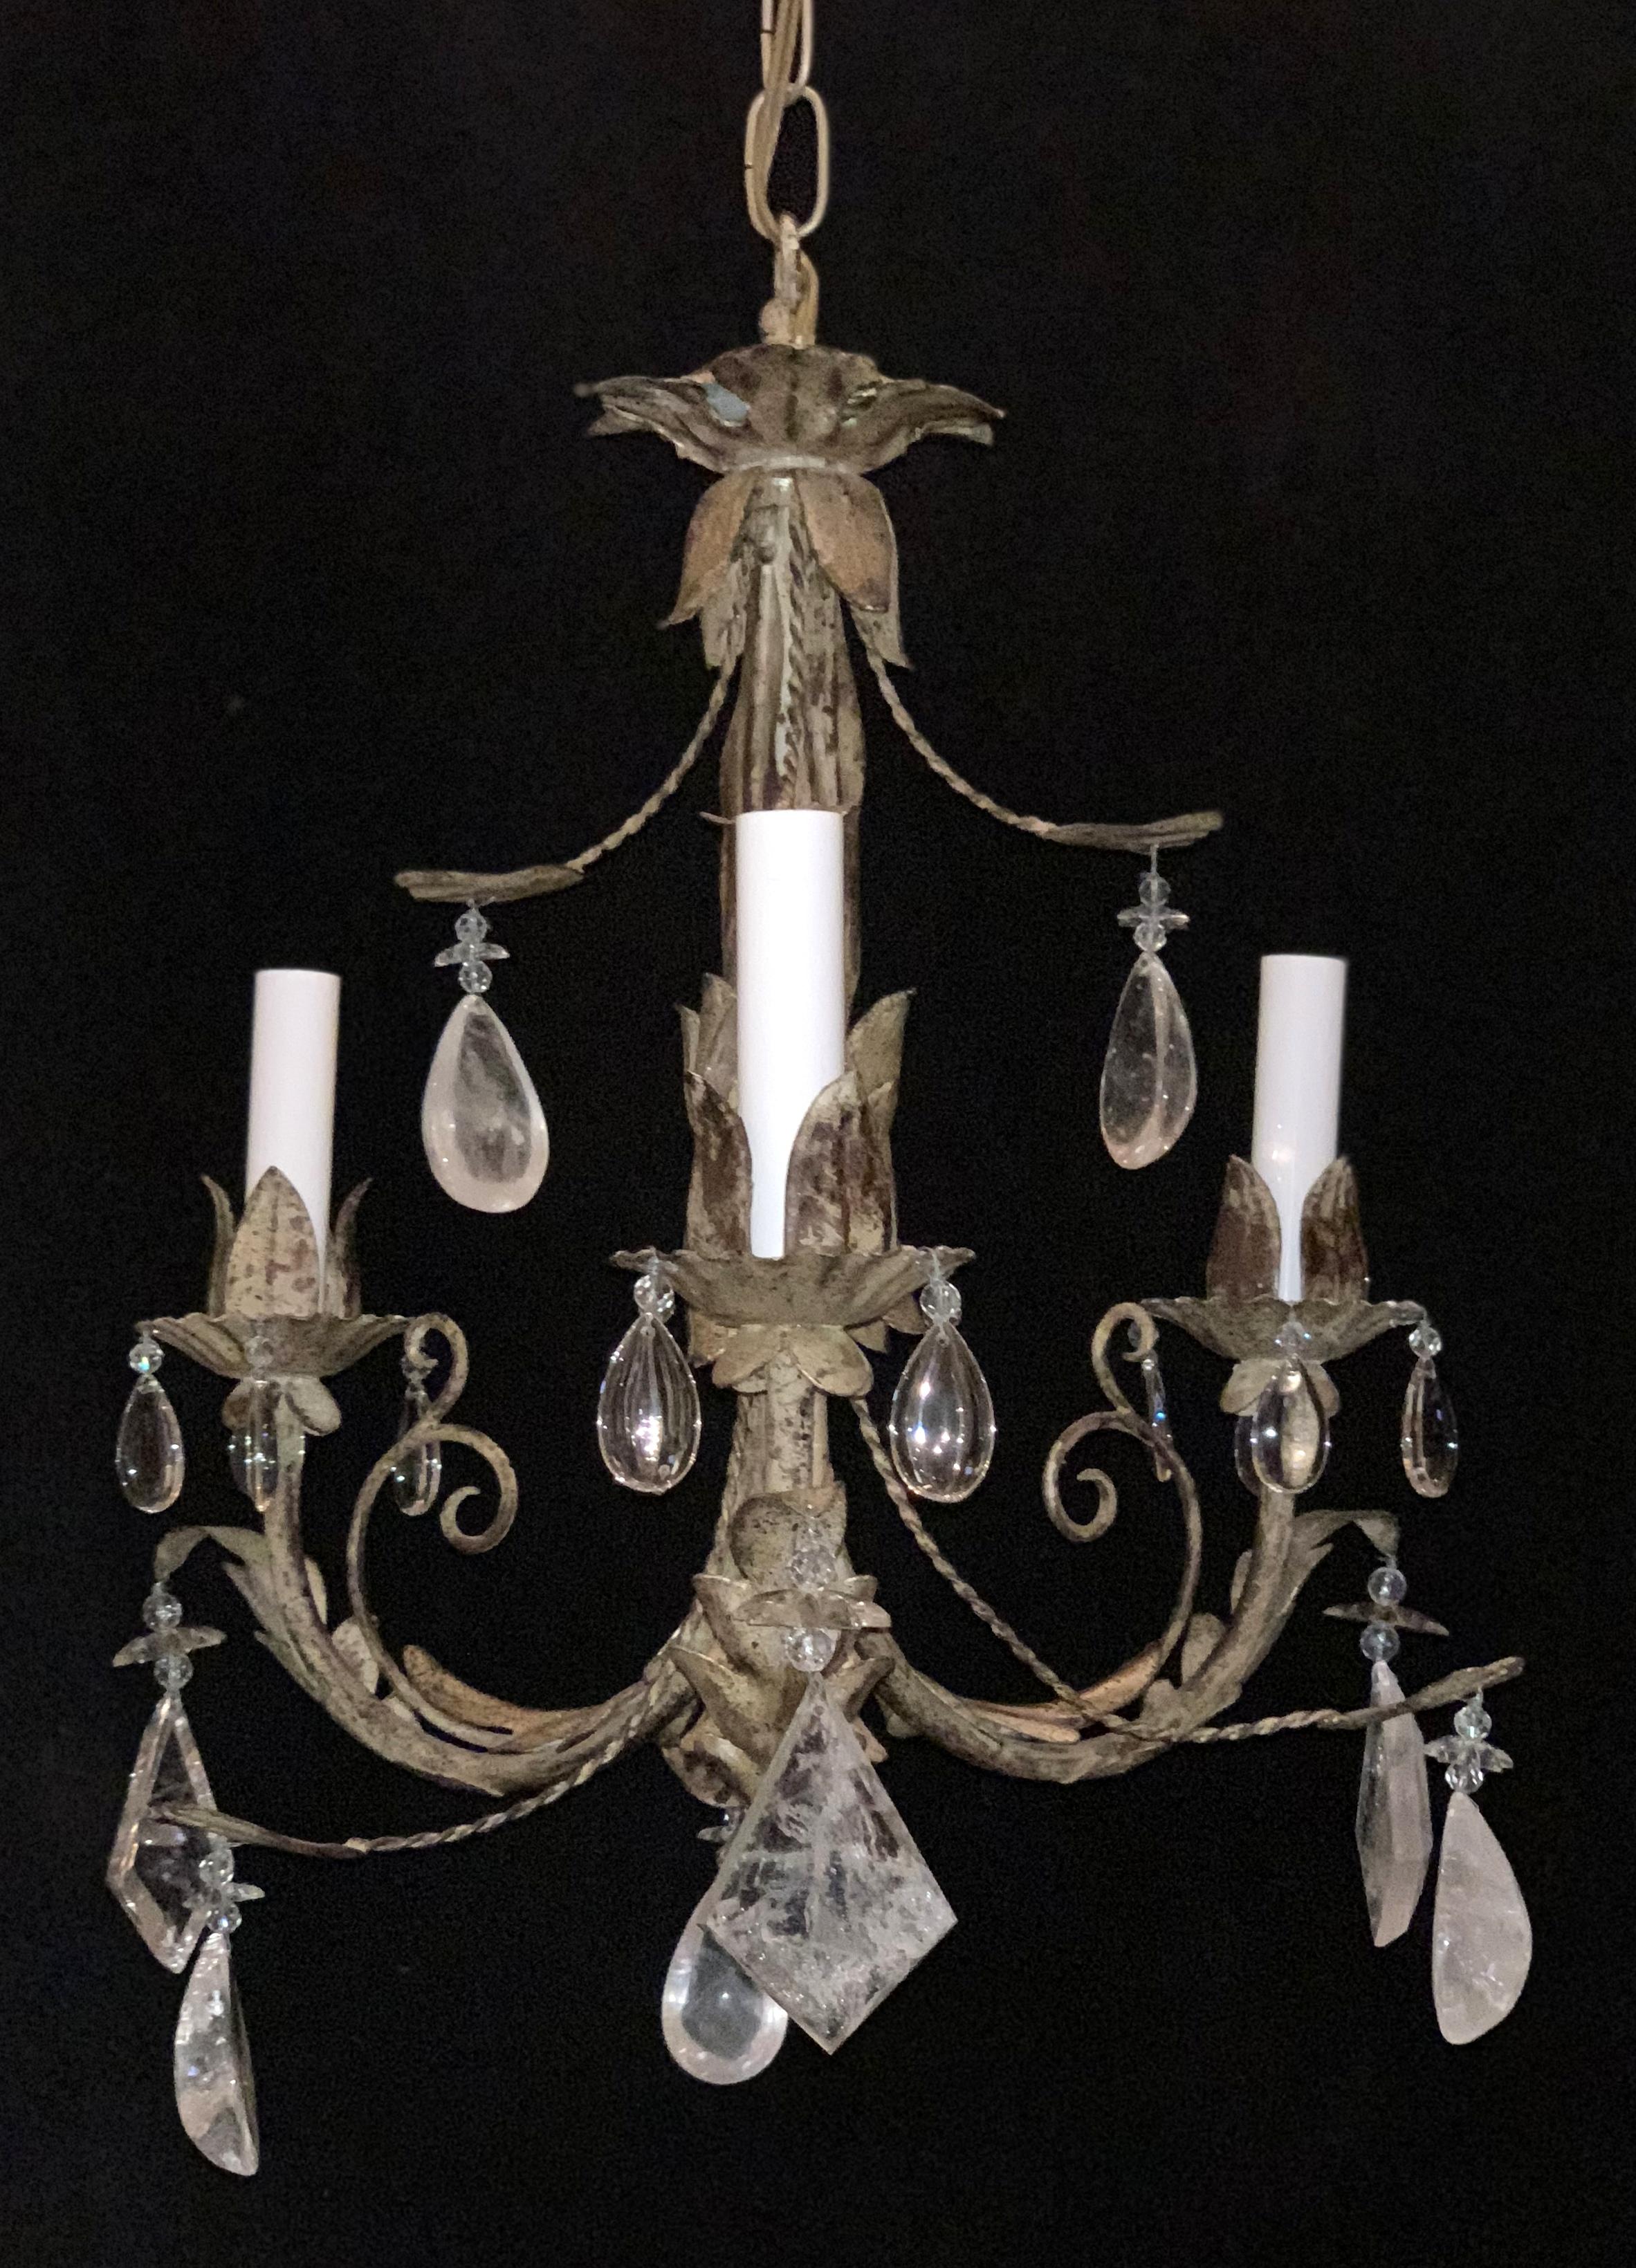 A wonderful vintage petite pair of midcentury Baguès style rock and star crystal, filigree and tassel form gilt tole chandeliers both rewired with 3 candelabra sockets each.